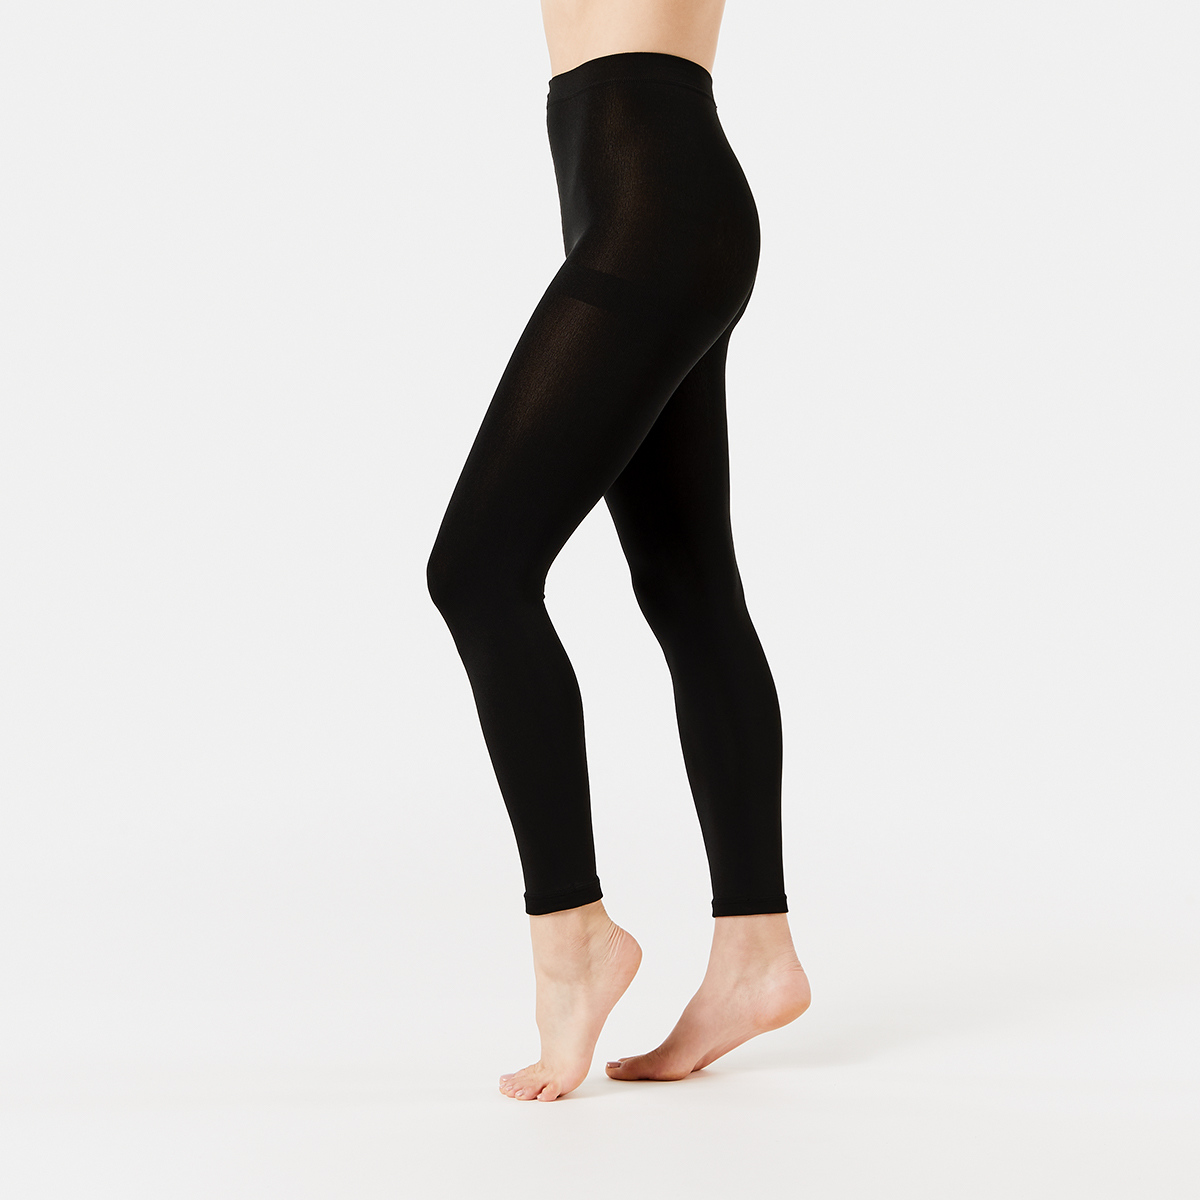 Kmart Active Womens Recycled Fleece Leggings-Navy Size: 14, Price History  & Comparison